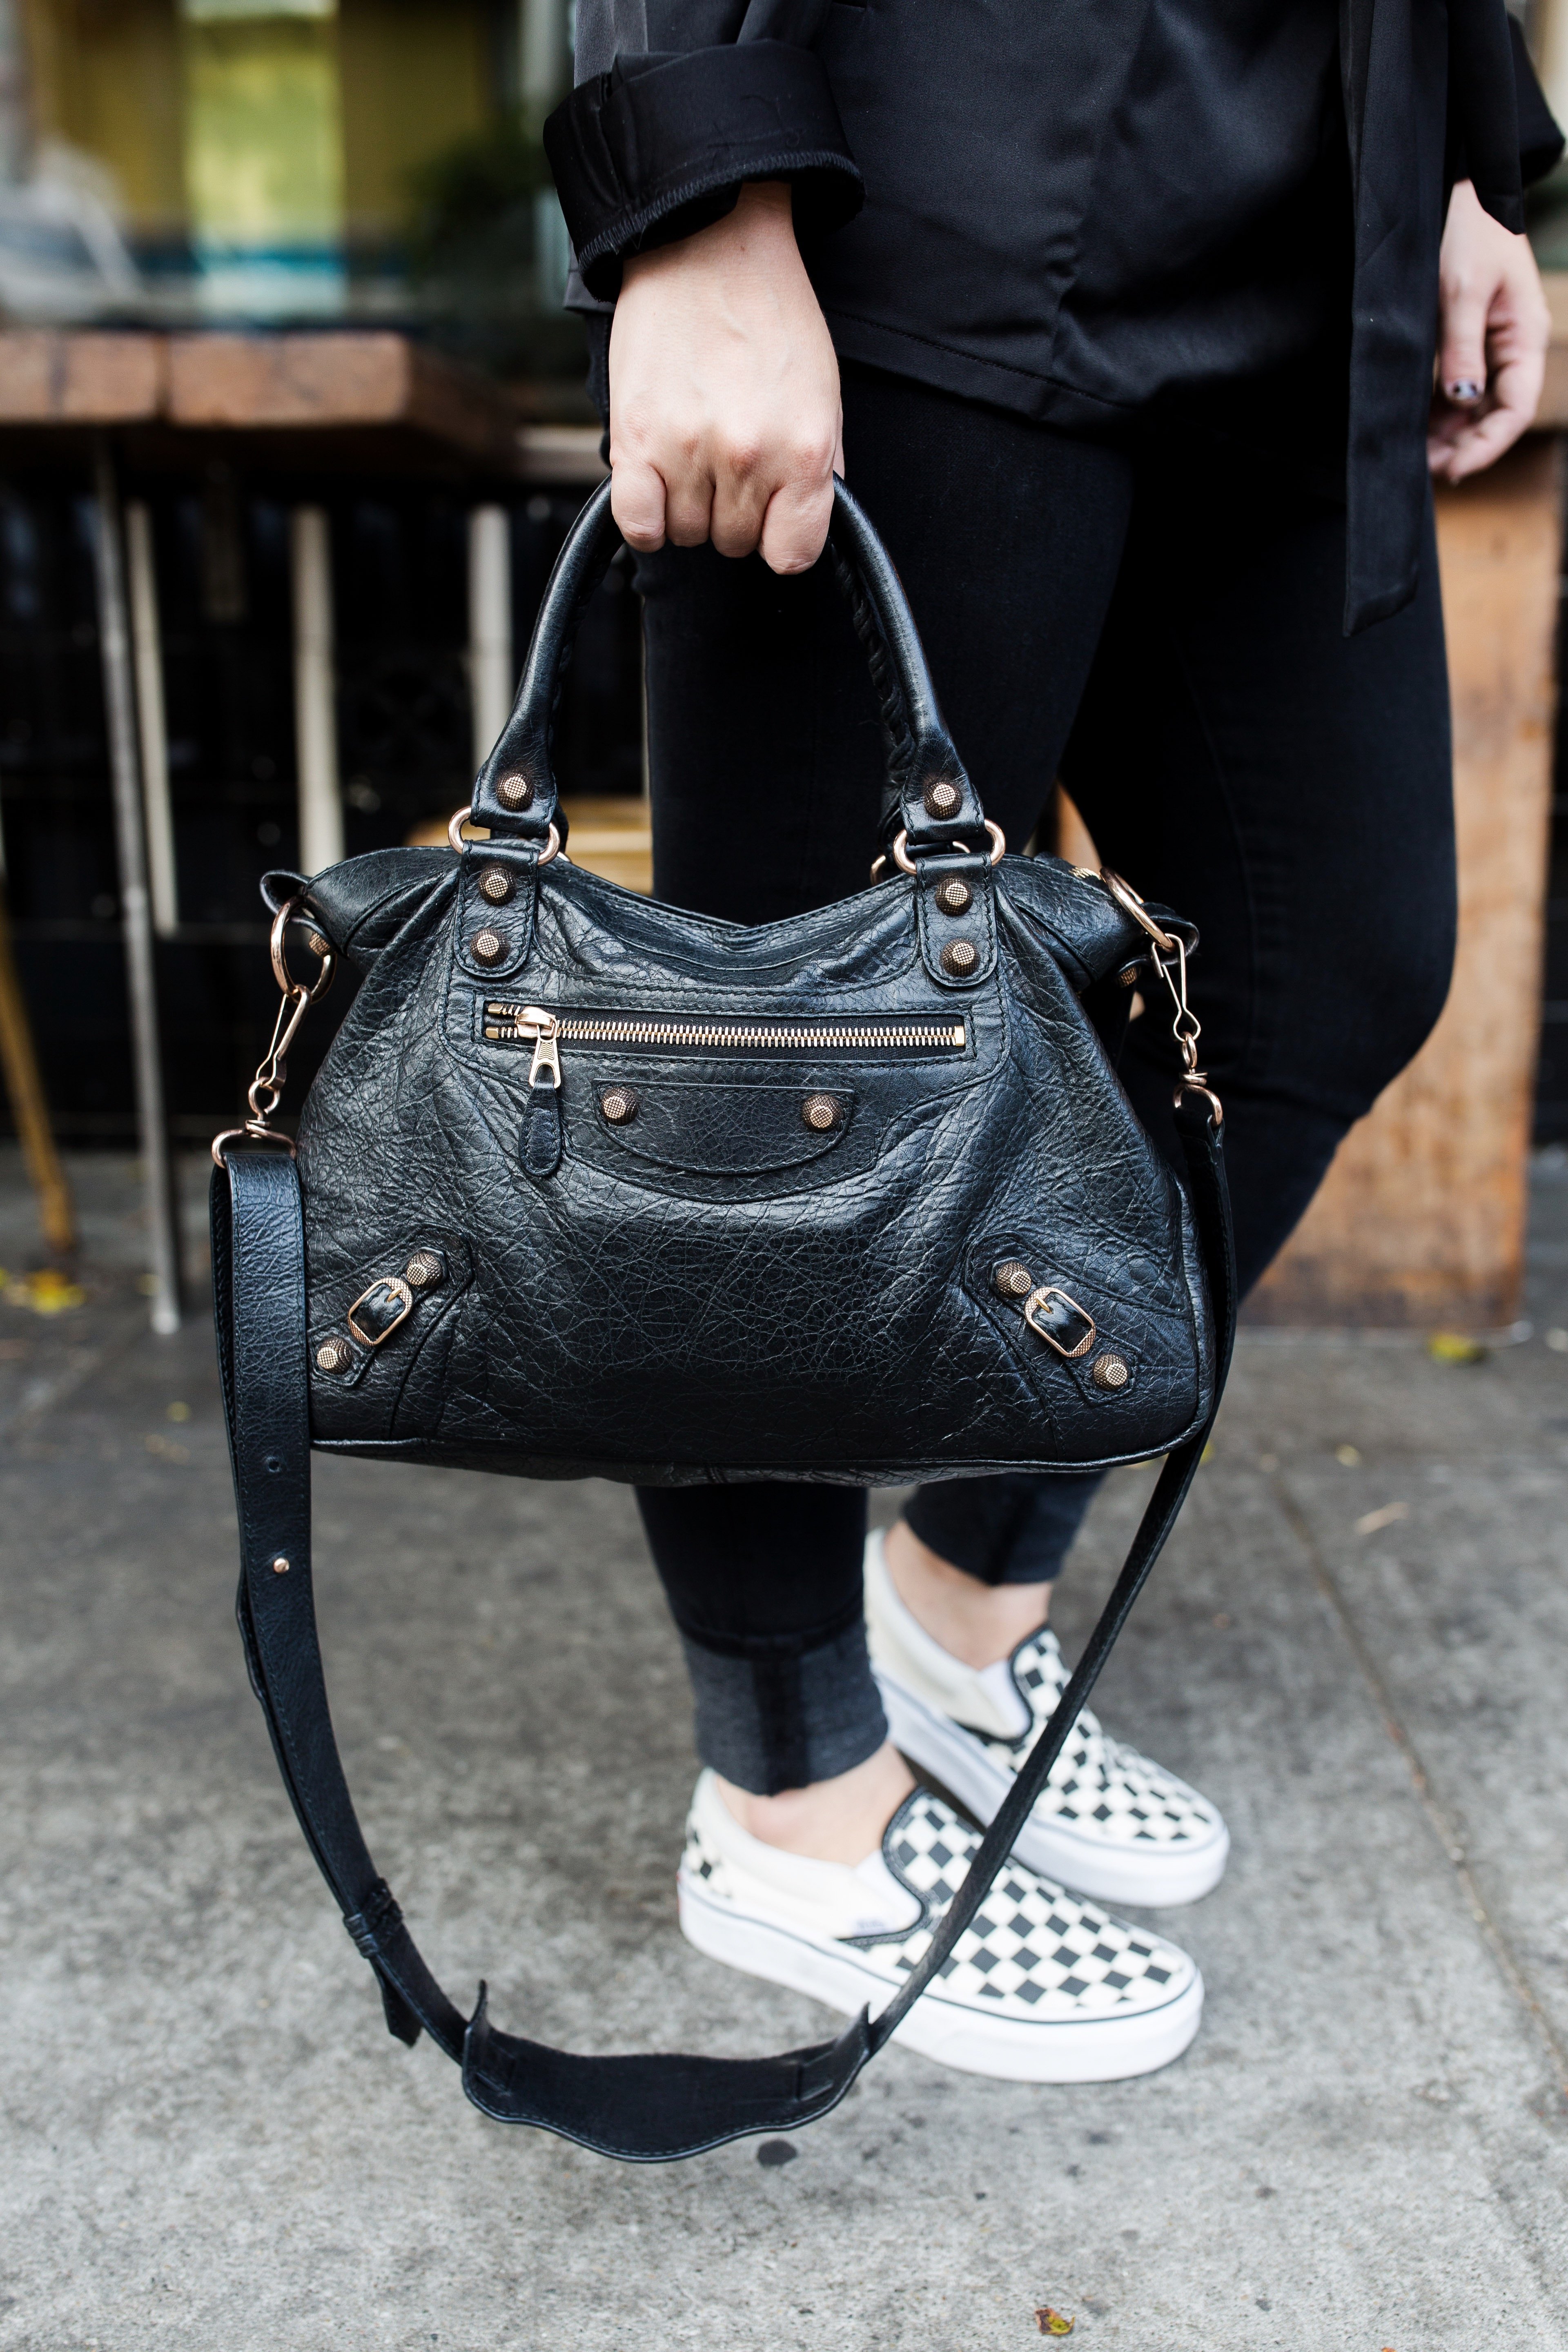 Everything You Need to Know About the Balenciaga City Bag - by Kelsey  Boyanzhu